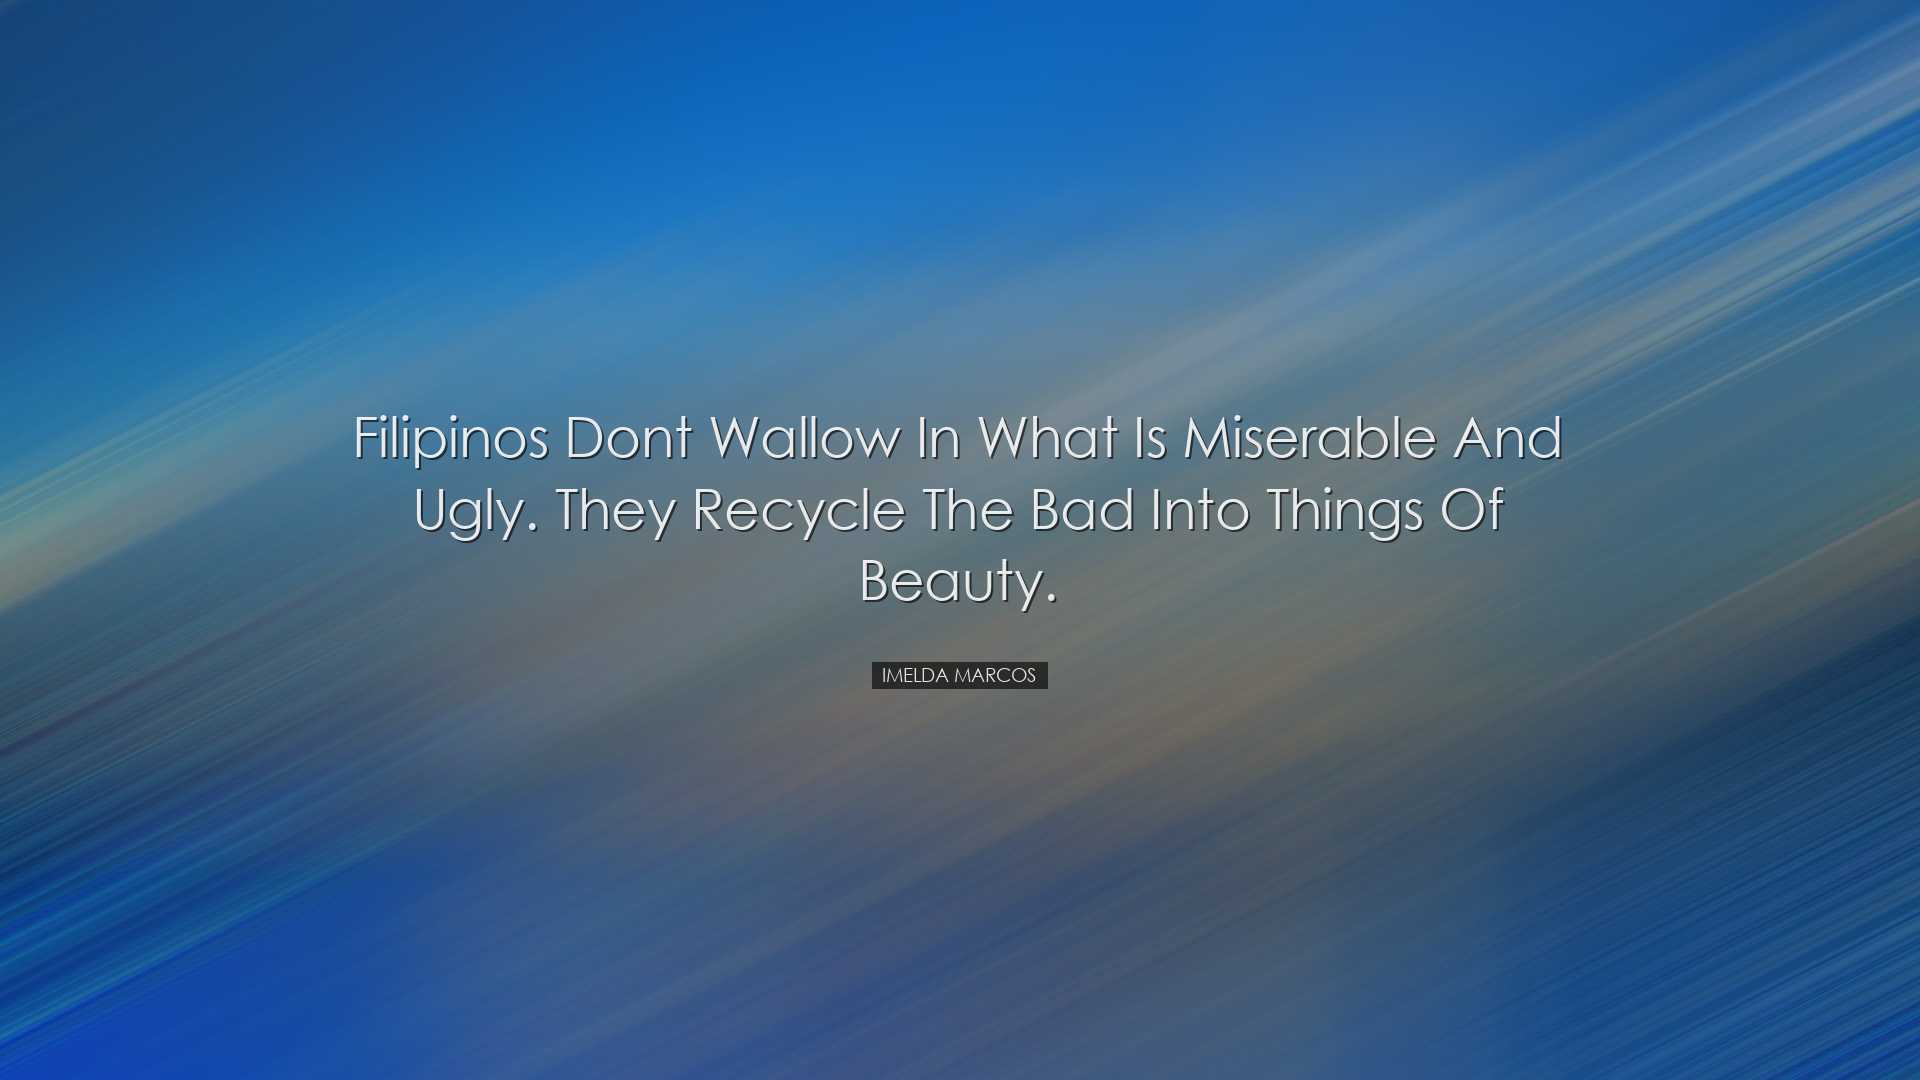 Filipinos dont wallow in what is miserable and ugly. They recycle